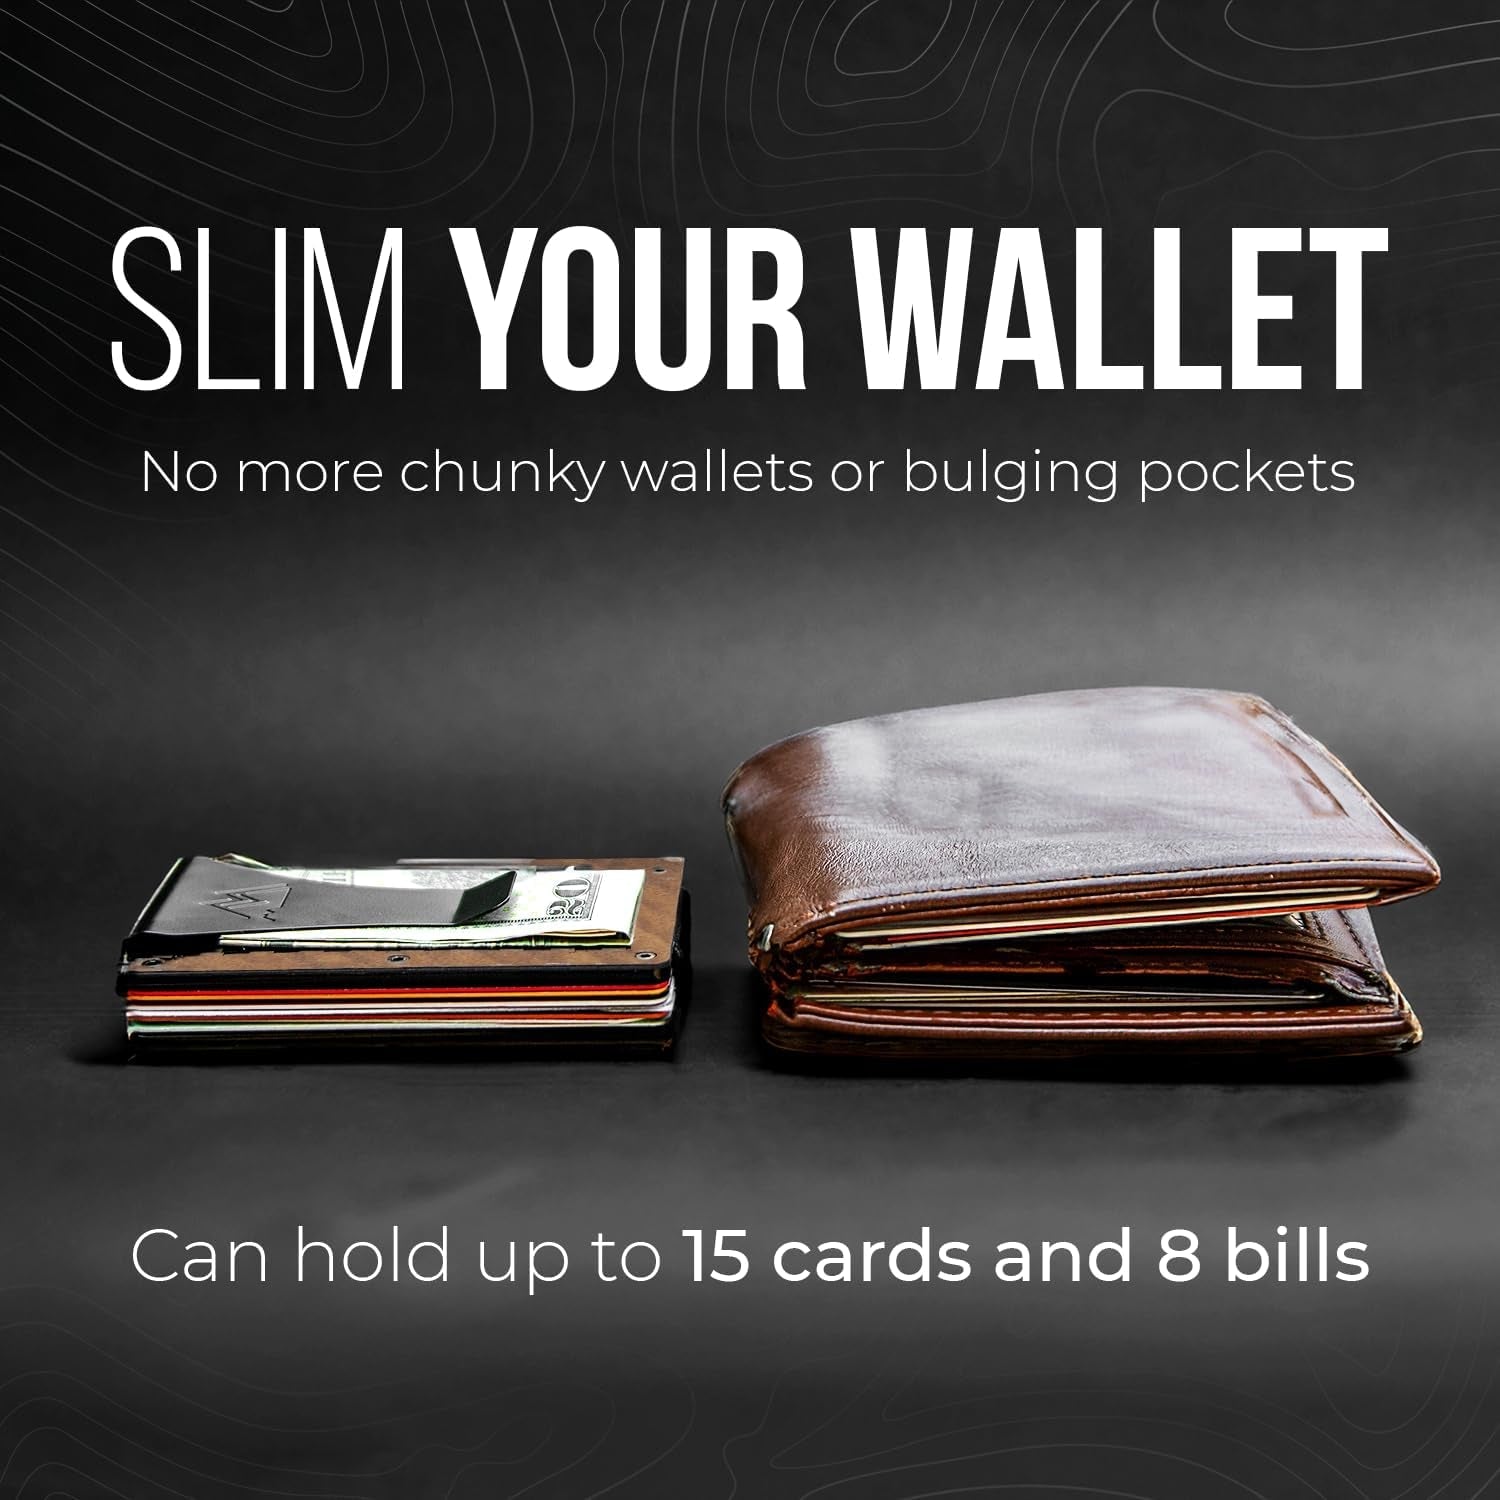 "Ultimate Adventure Companion: Mountain Voyage Minimalist Wallet - Sleek RFID Wallet, Durable & Stylish, Easy Access to Cards and Cash, Perfect for Men on the Go!"